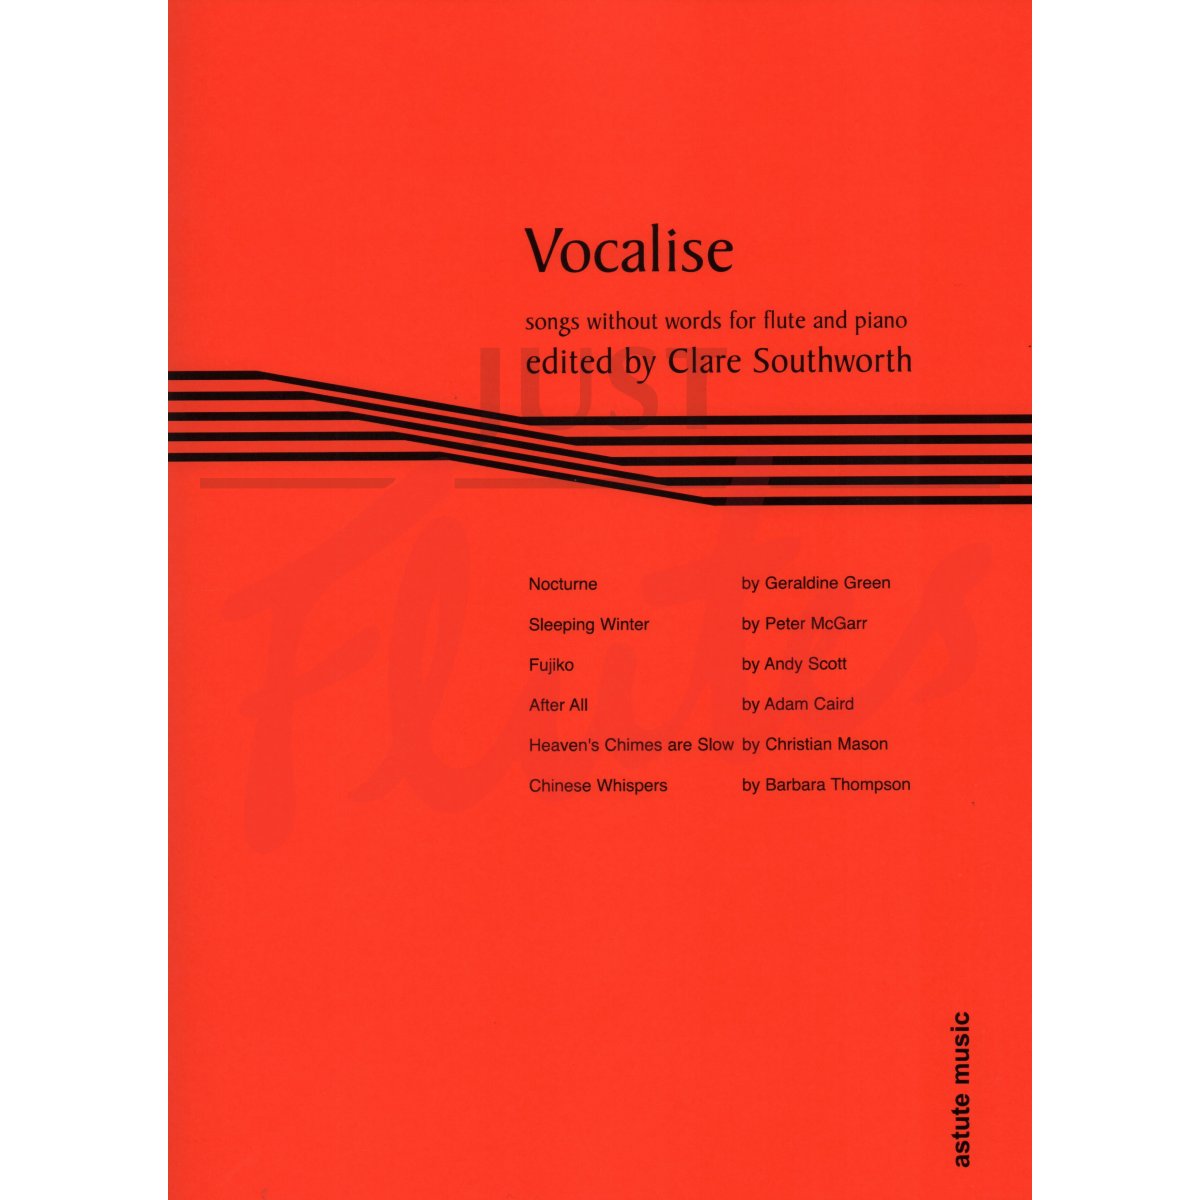 Vocalise: Songs Without Words for Flute and Piano